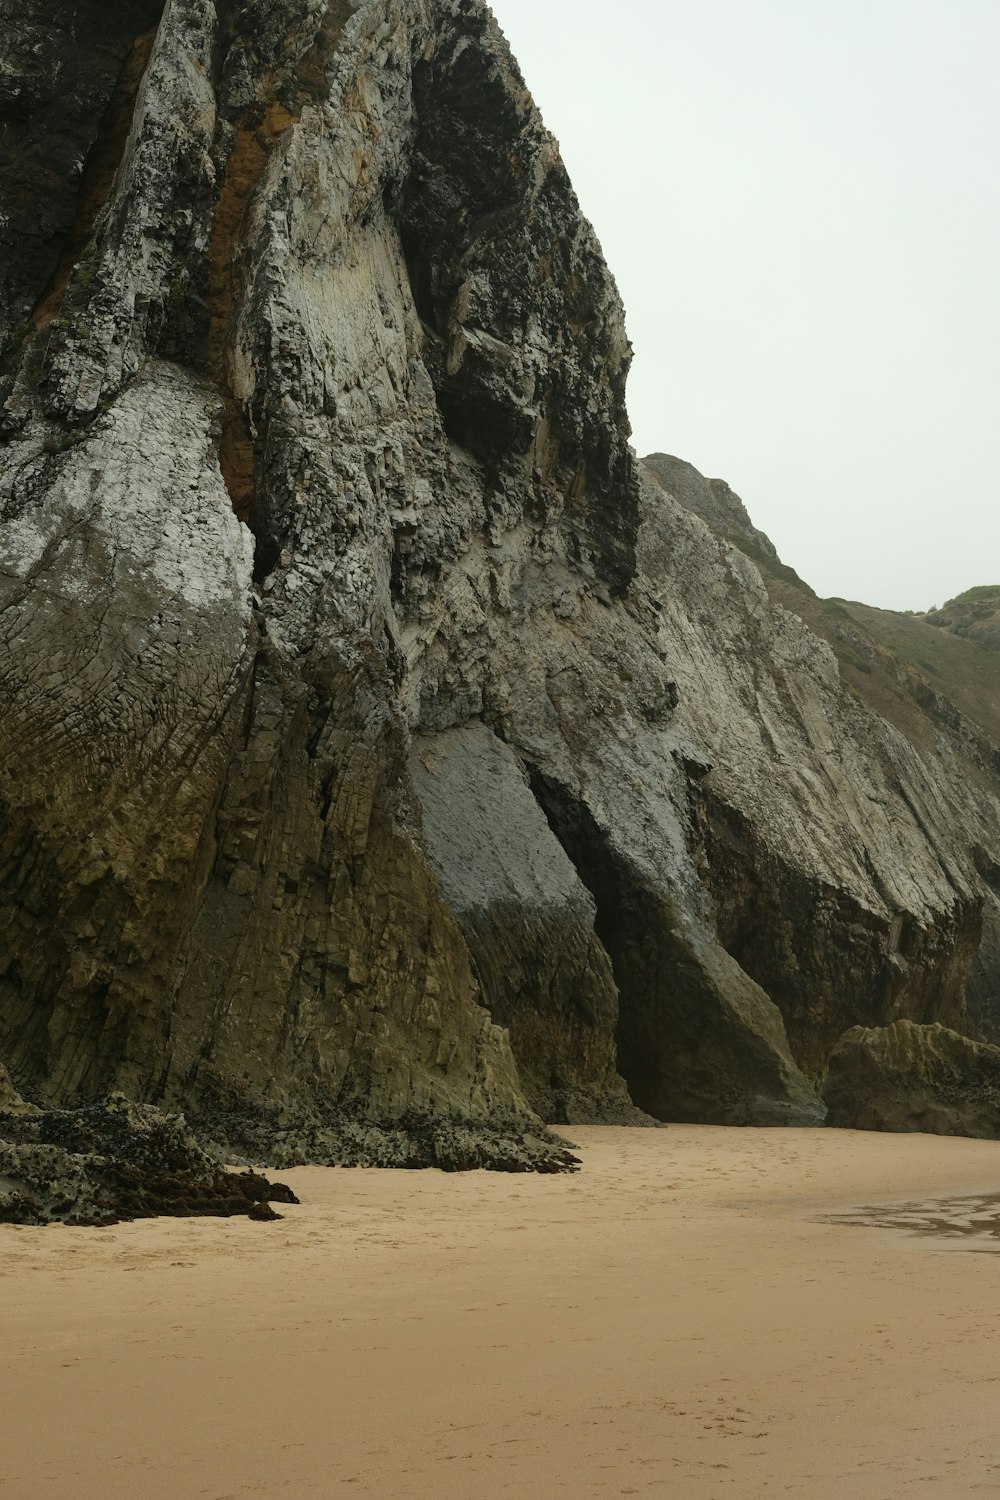 a large rock formation on a sandy beach